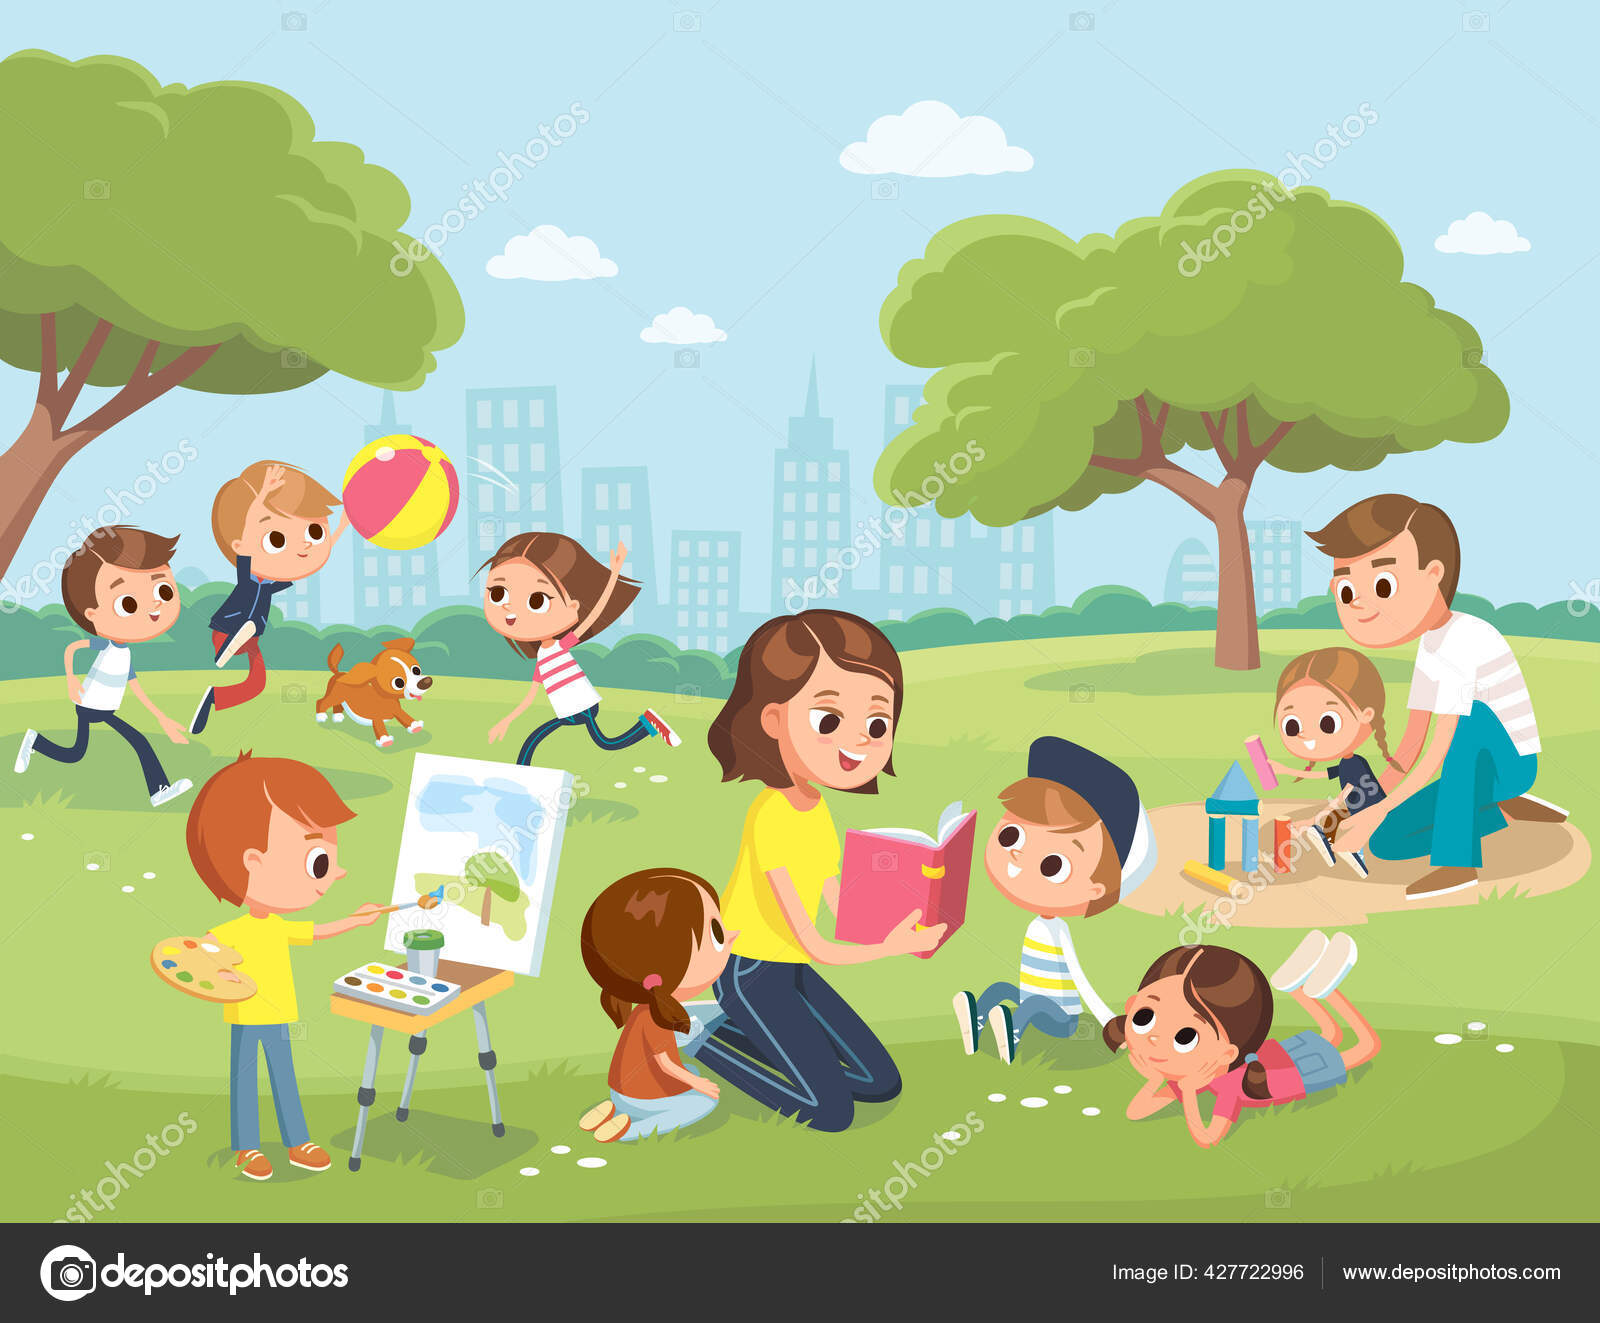 Premium Vector | Children in the park playing sketch hand drawn